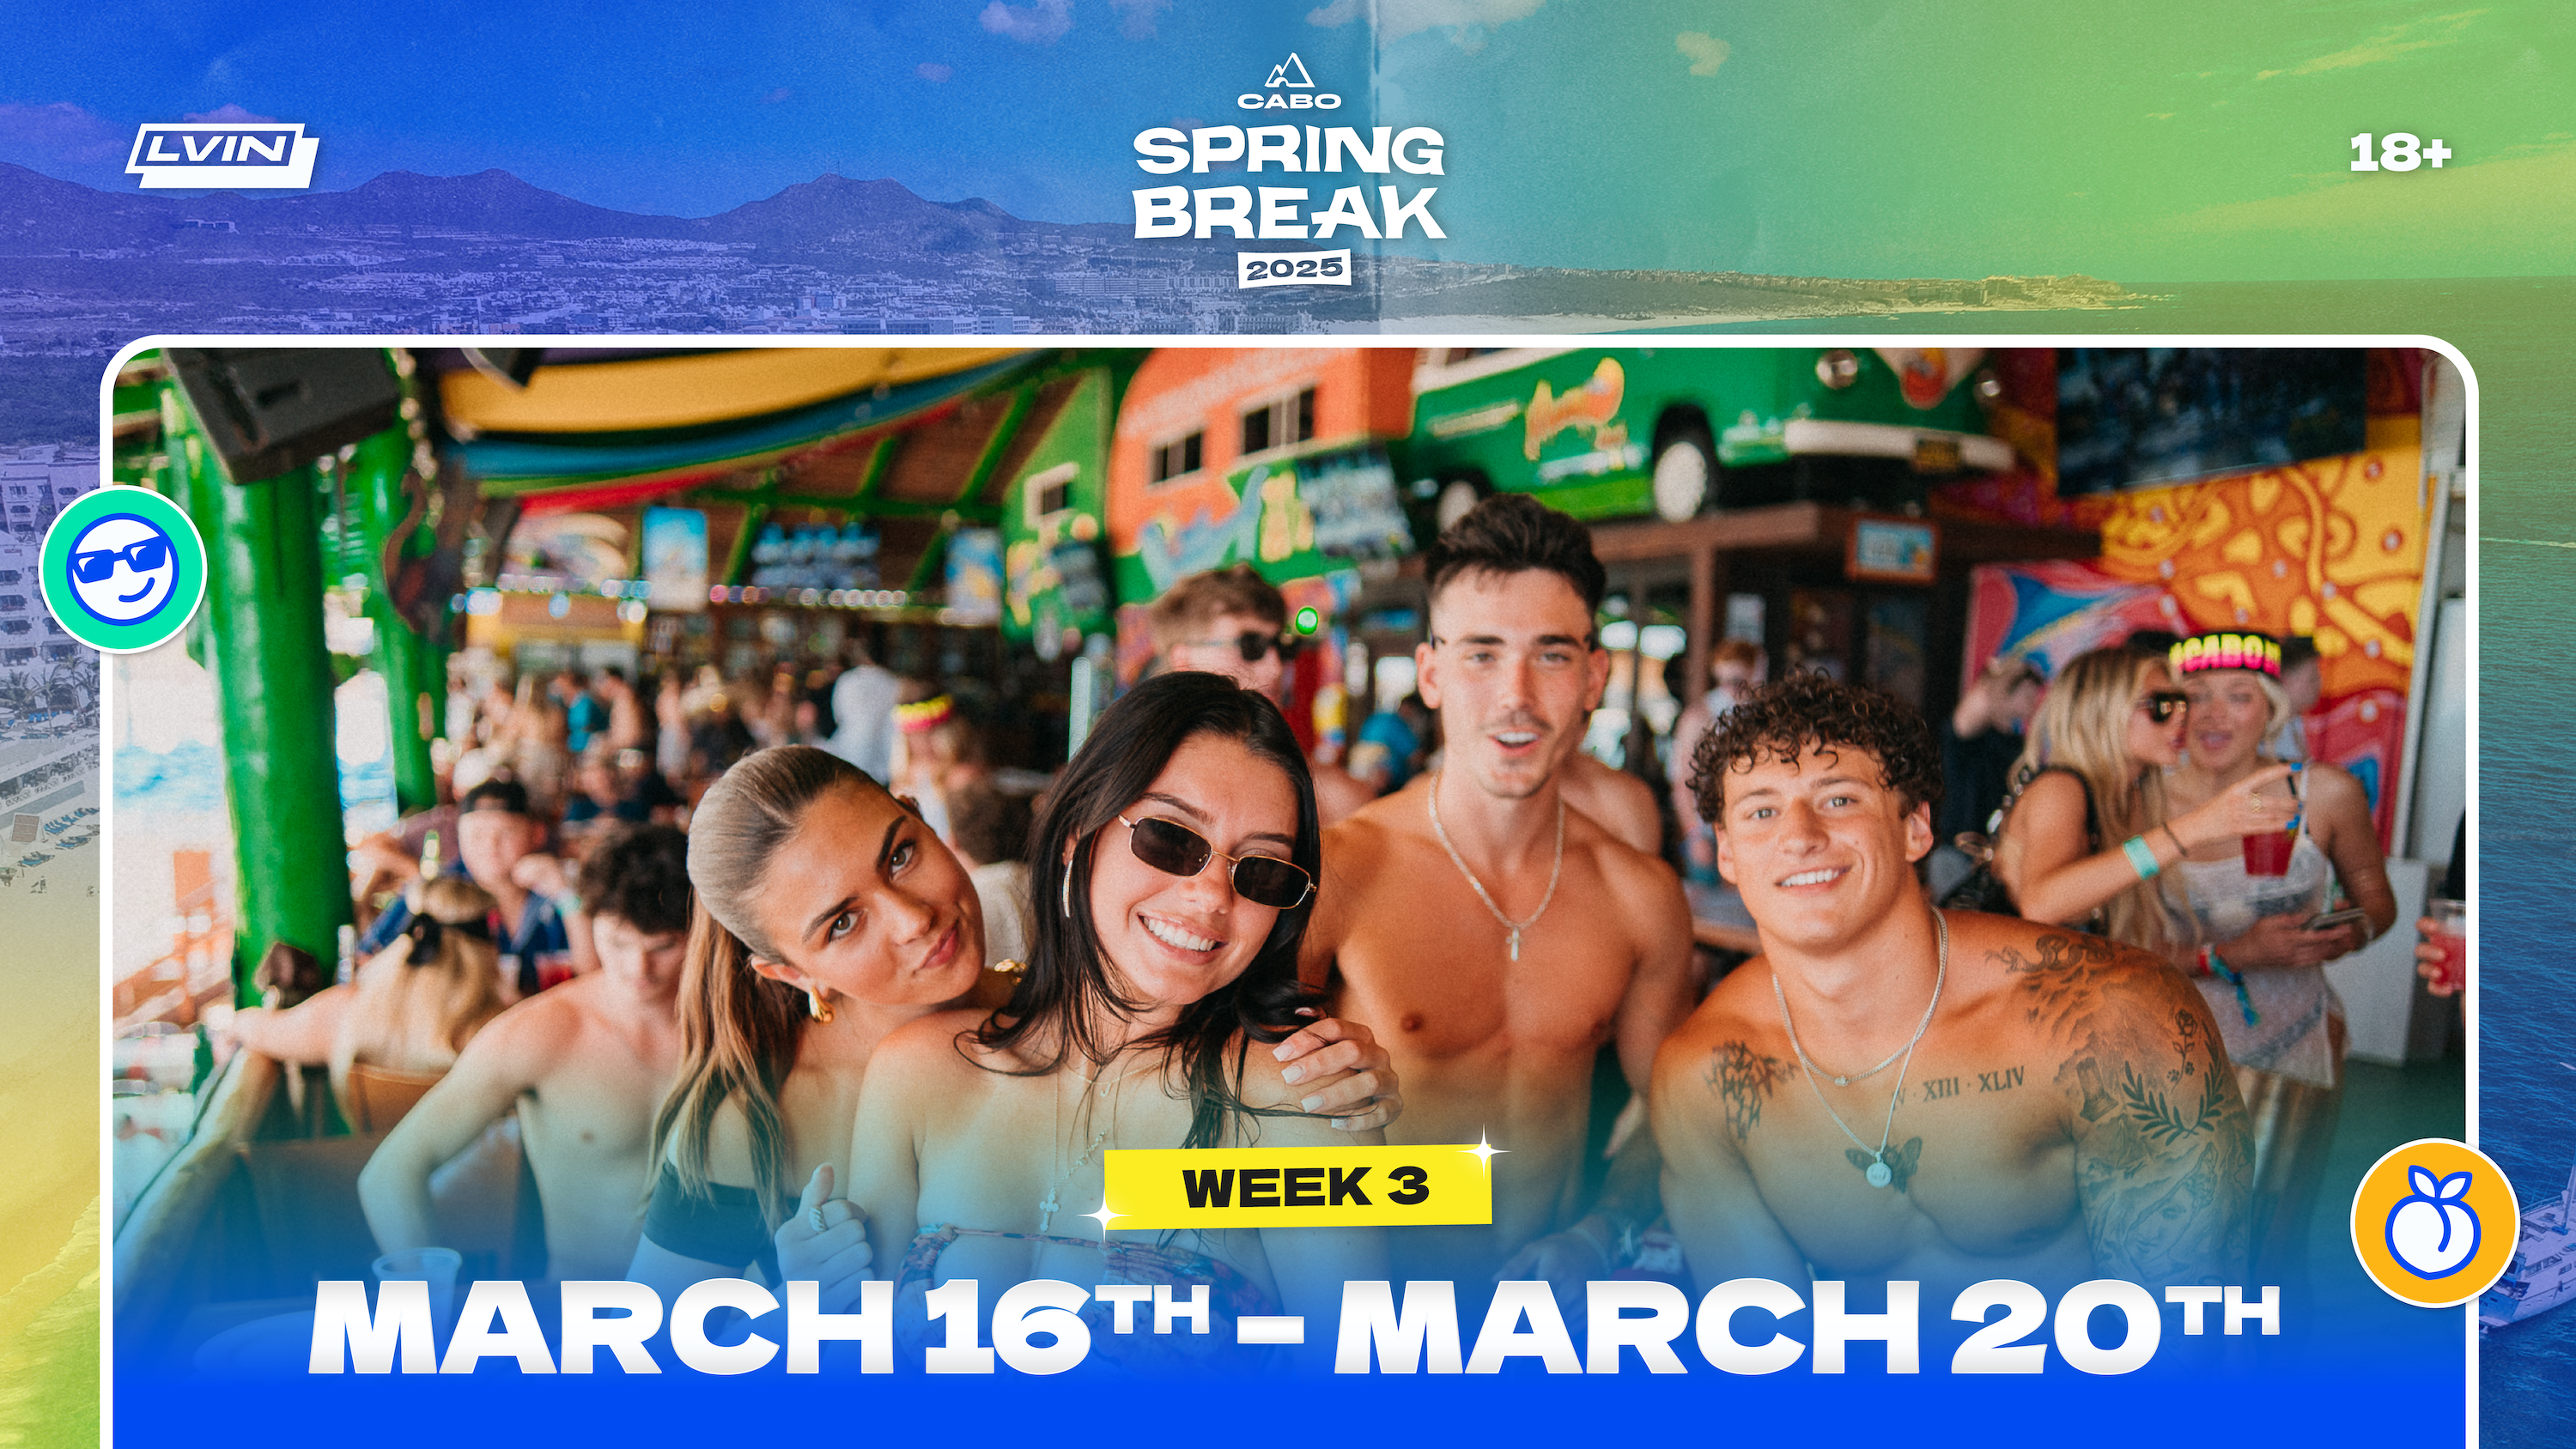 Cabo Spring Break 2025 Week 3 Header March 16 to March 20 LVIN